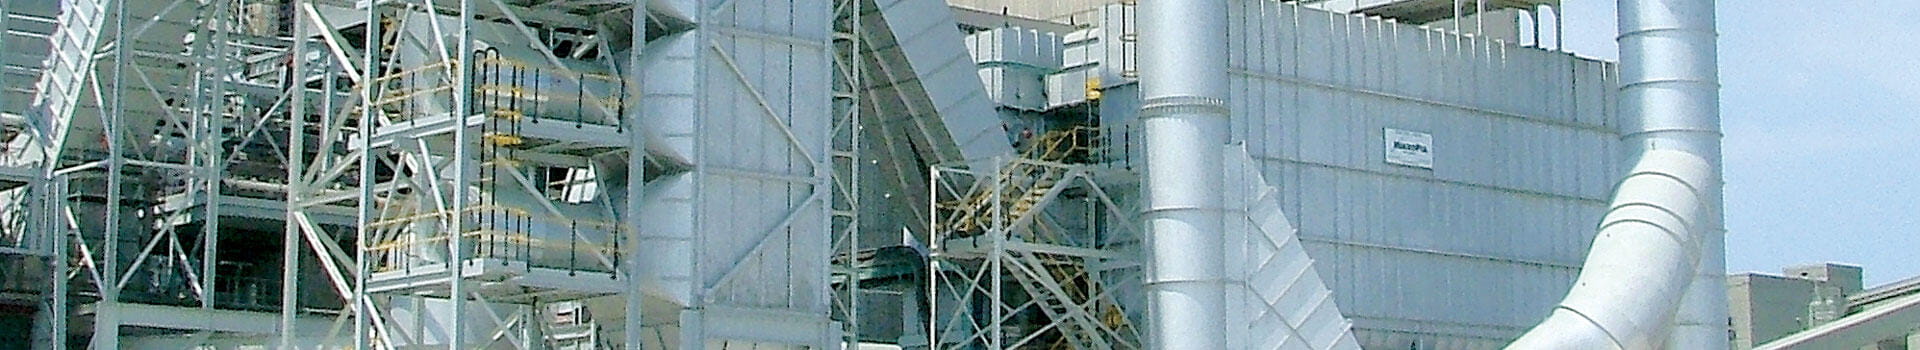 Cement dust collector